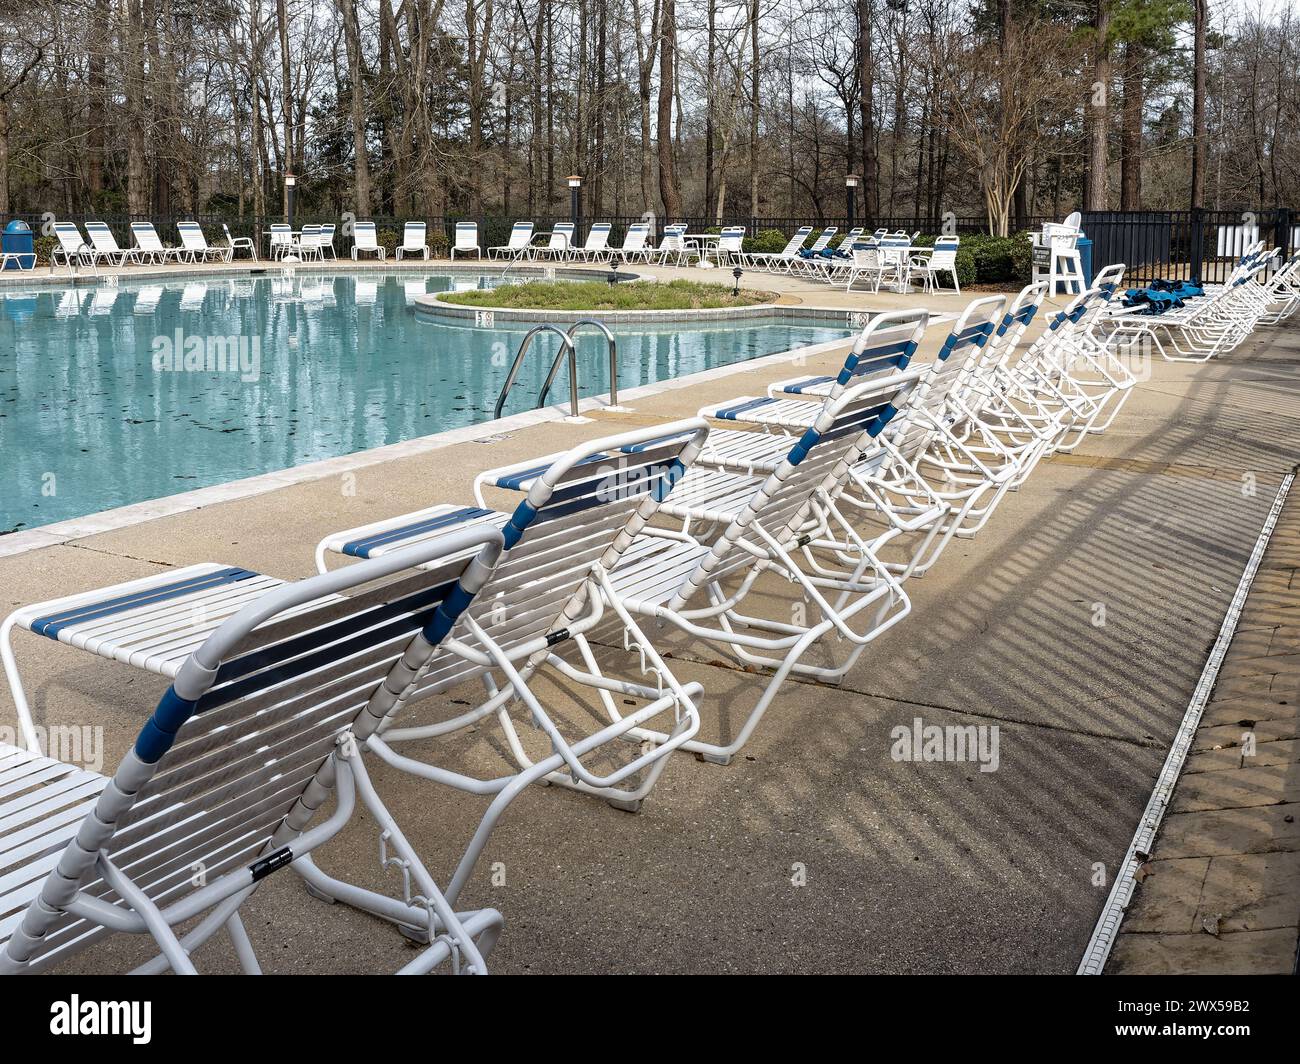 Pool deck with lounge chairs lined up waiting for summer crowds at a large swimming pool in a residential community in Pike Road Alabama, USA. Stock Photo